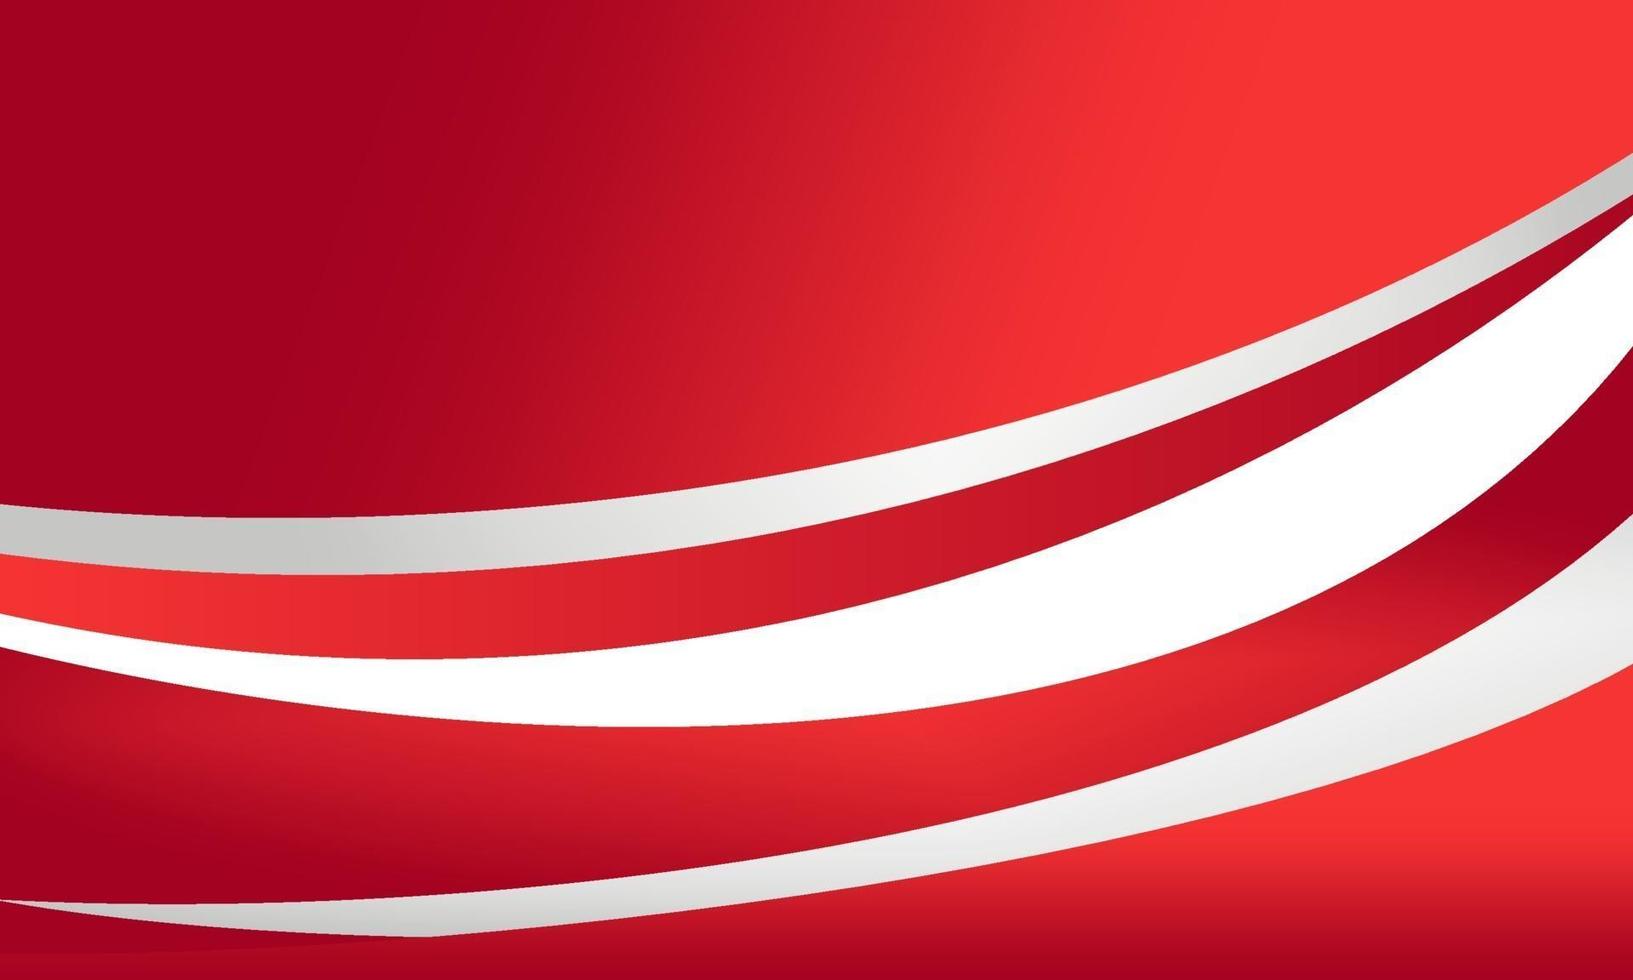 Modern Gradient Red Lined Background With Curves vector